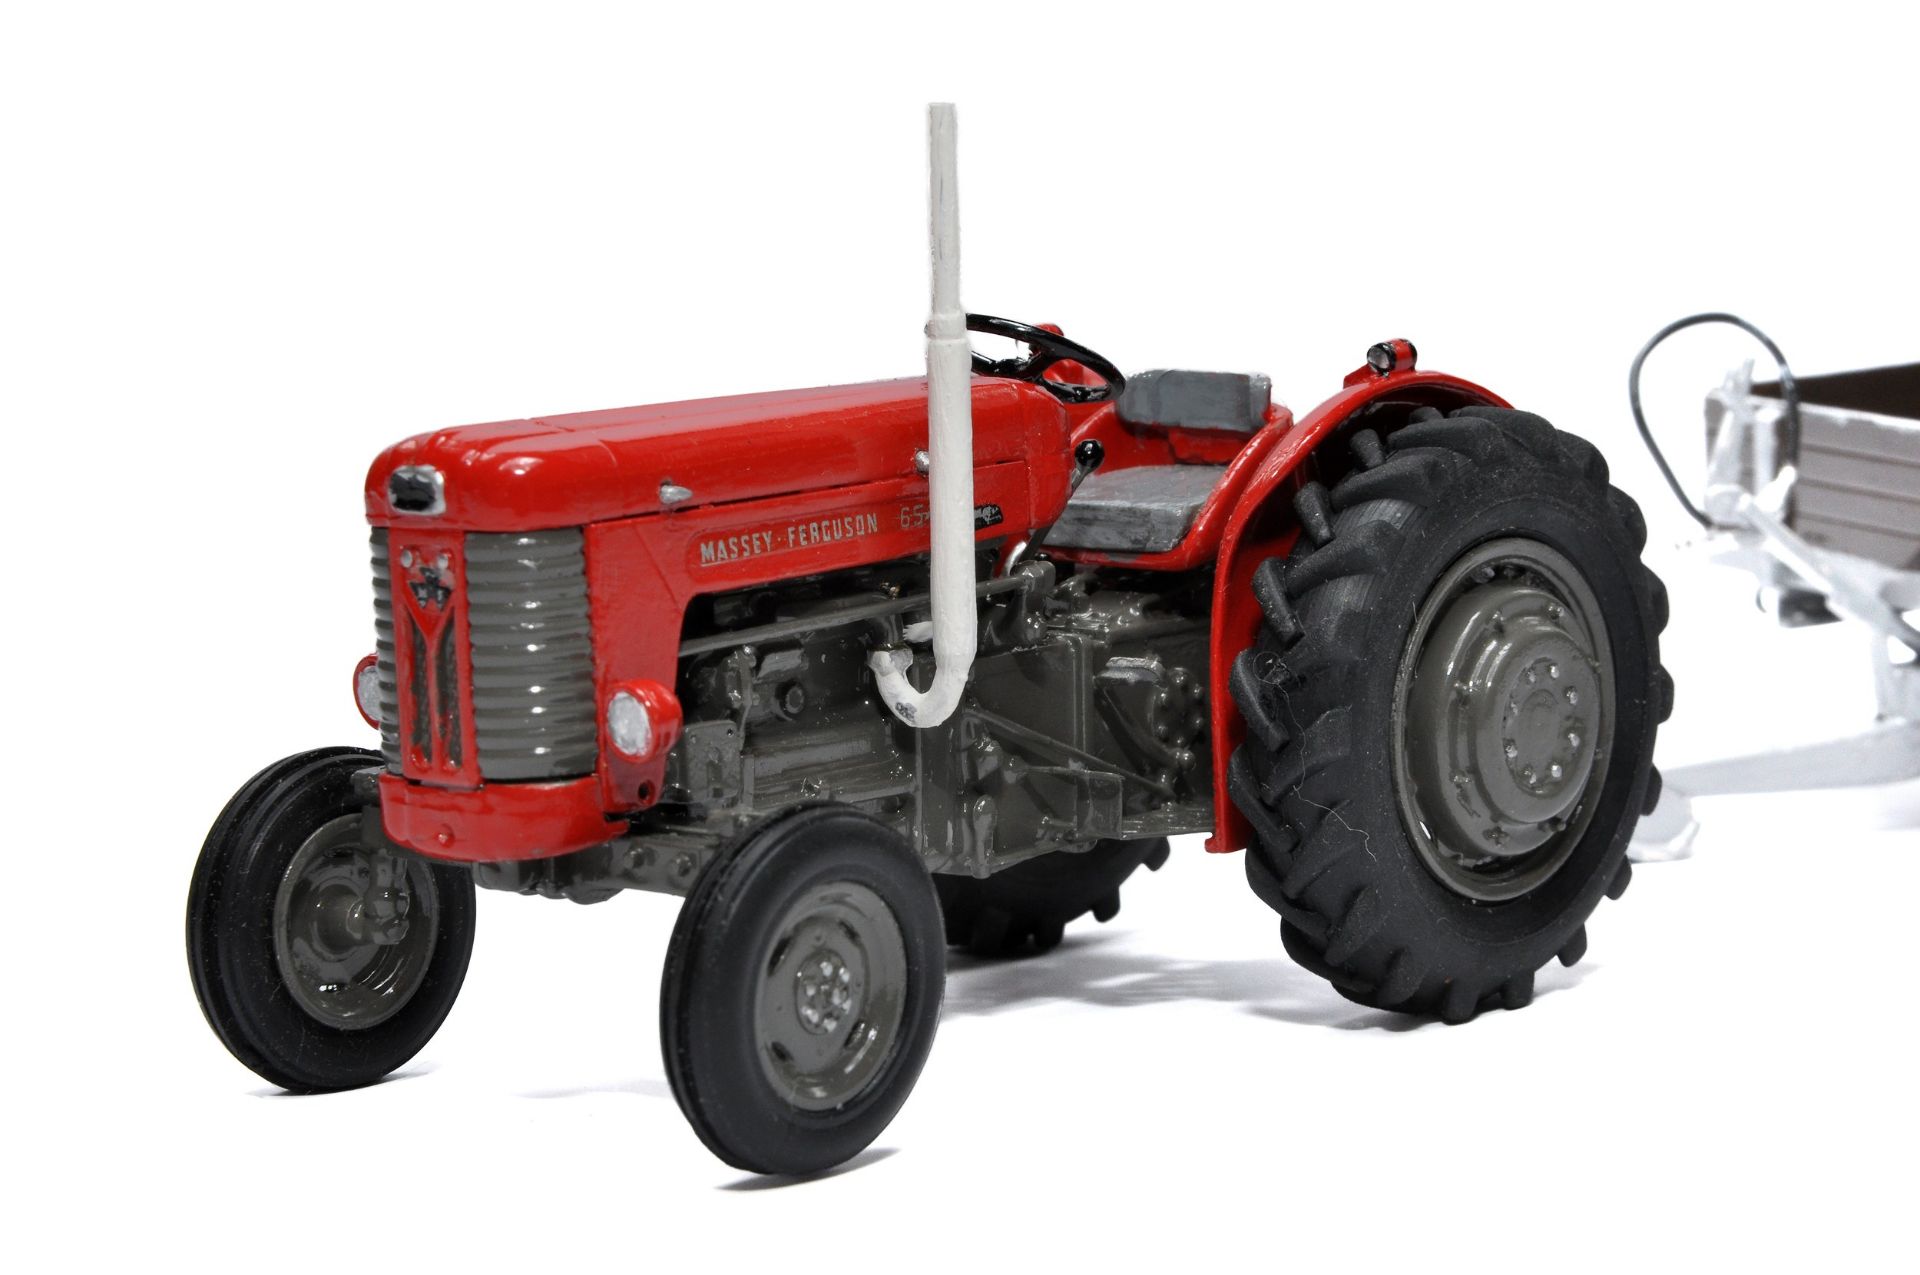 Scaledown Models 1/32 White Metal Farm Model issue comprising Massey Ferguson 65 Tractor and Rear - Image 2 of 3